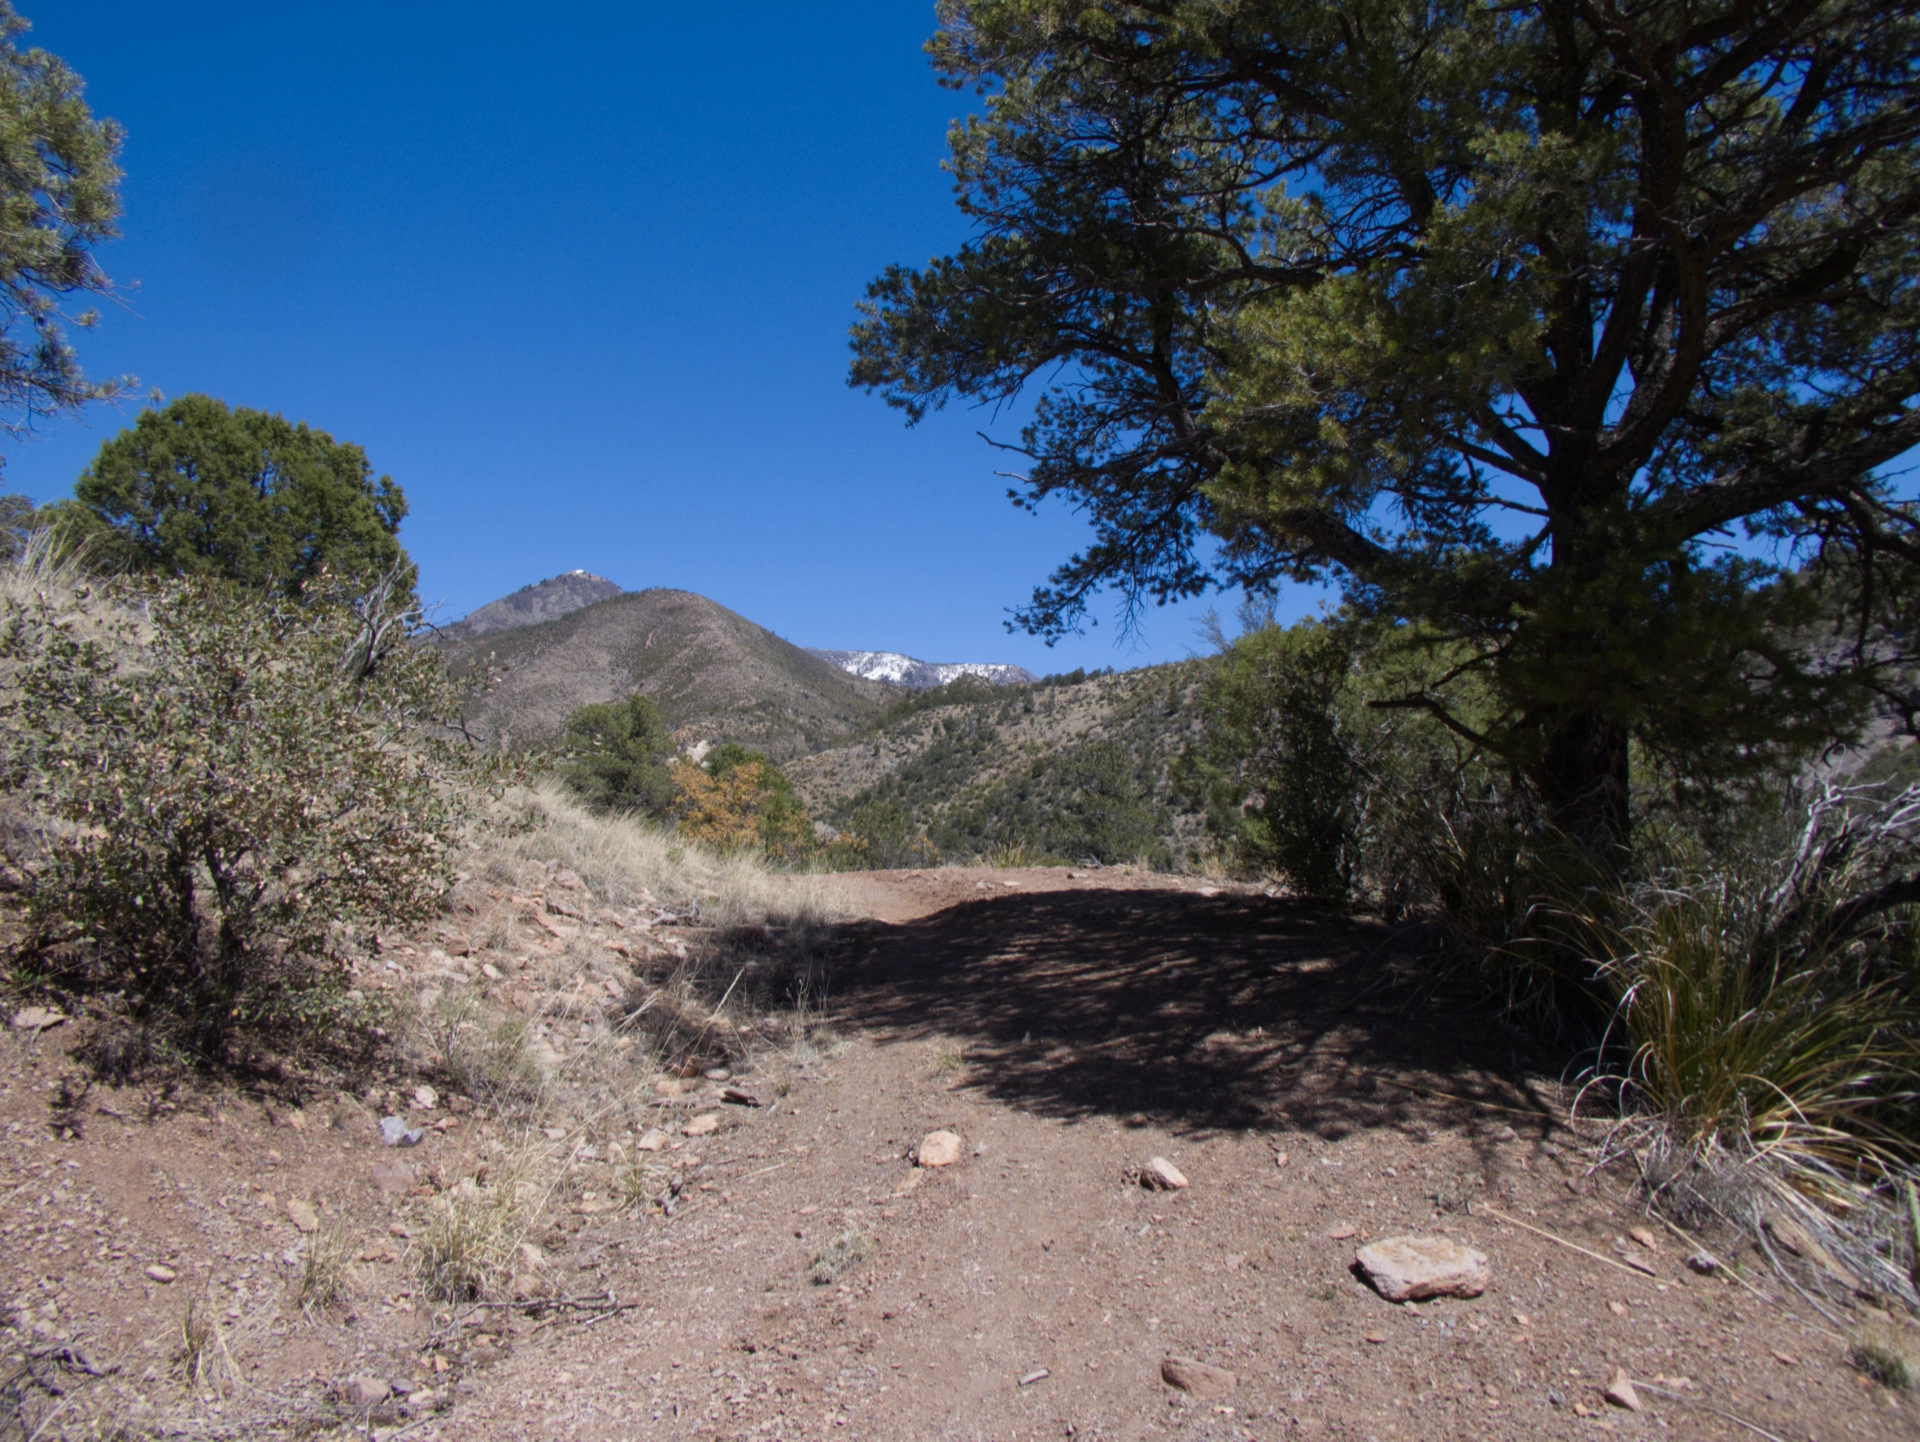 start of the trail, view of snow-capped mountains